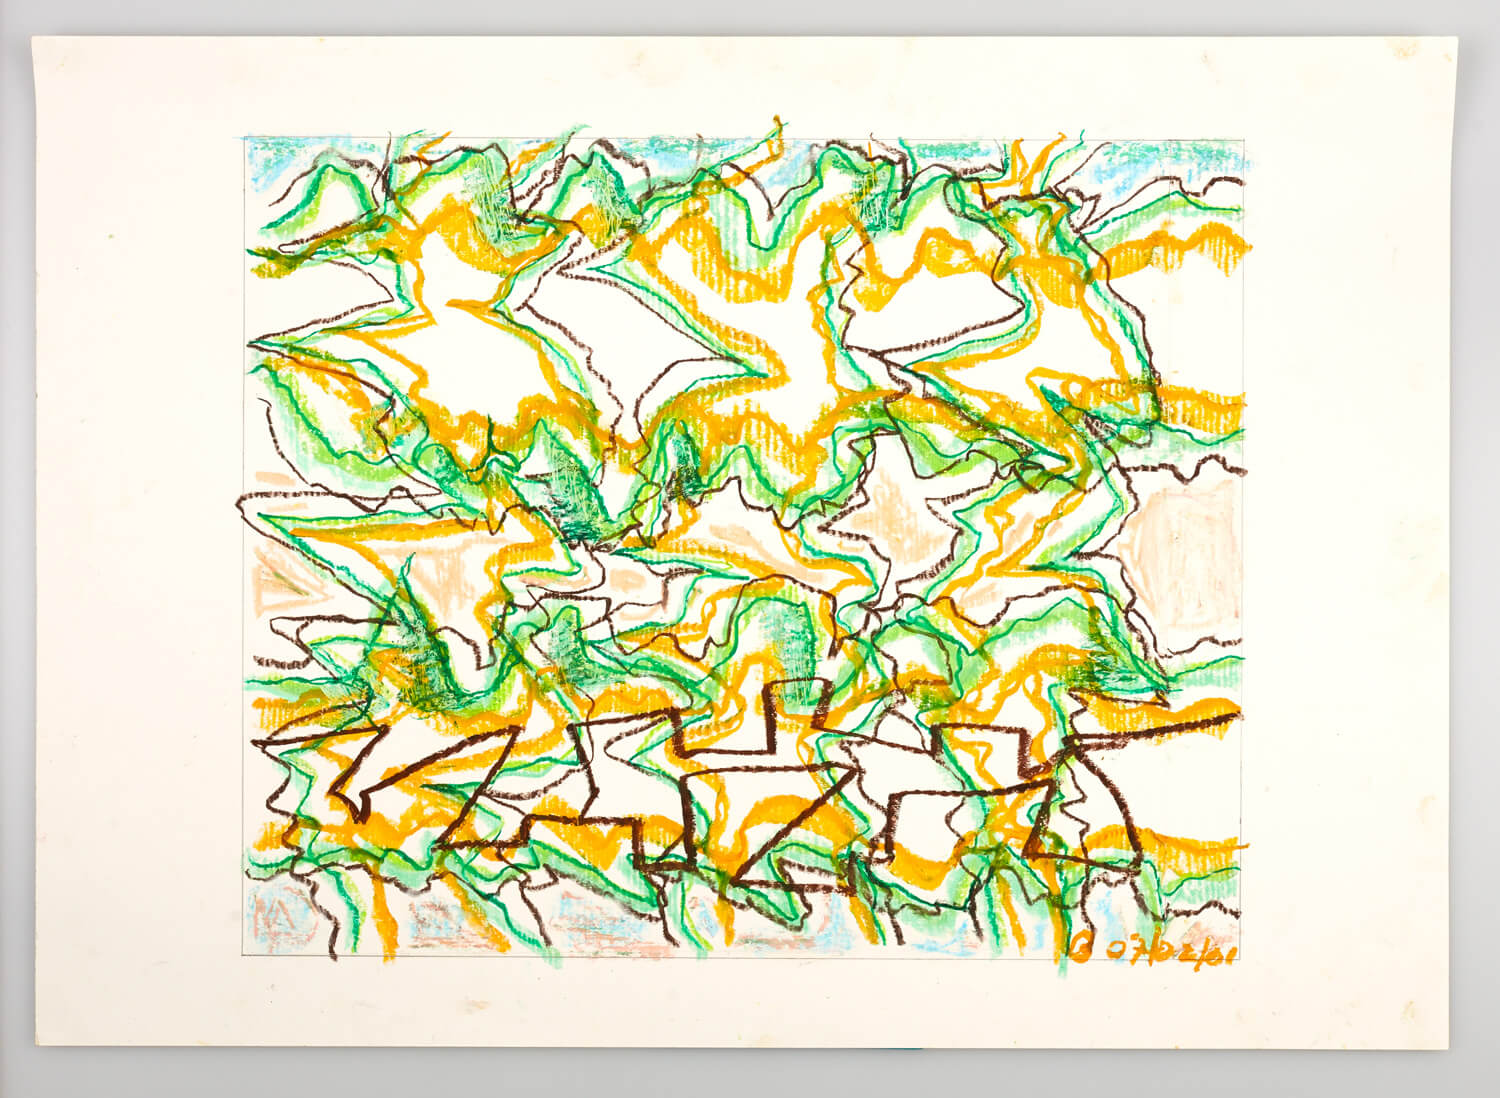 JB129 - Green, Yellow and Black Landscape - 2001 - 41 x 49 cm - Conte on paper